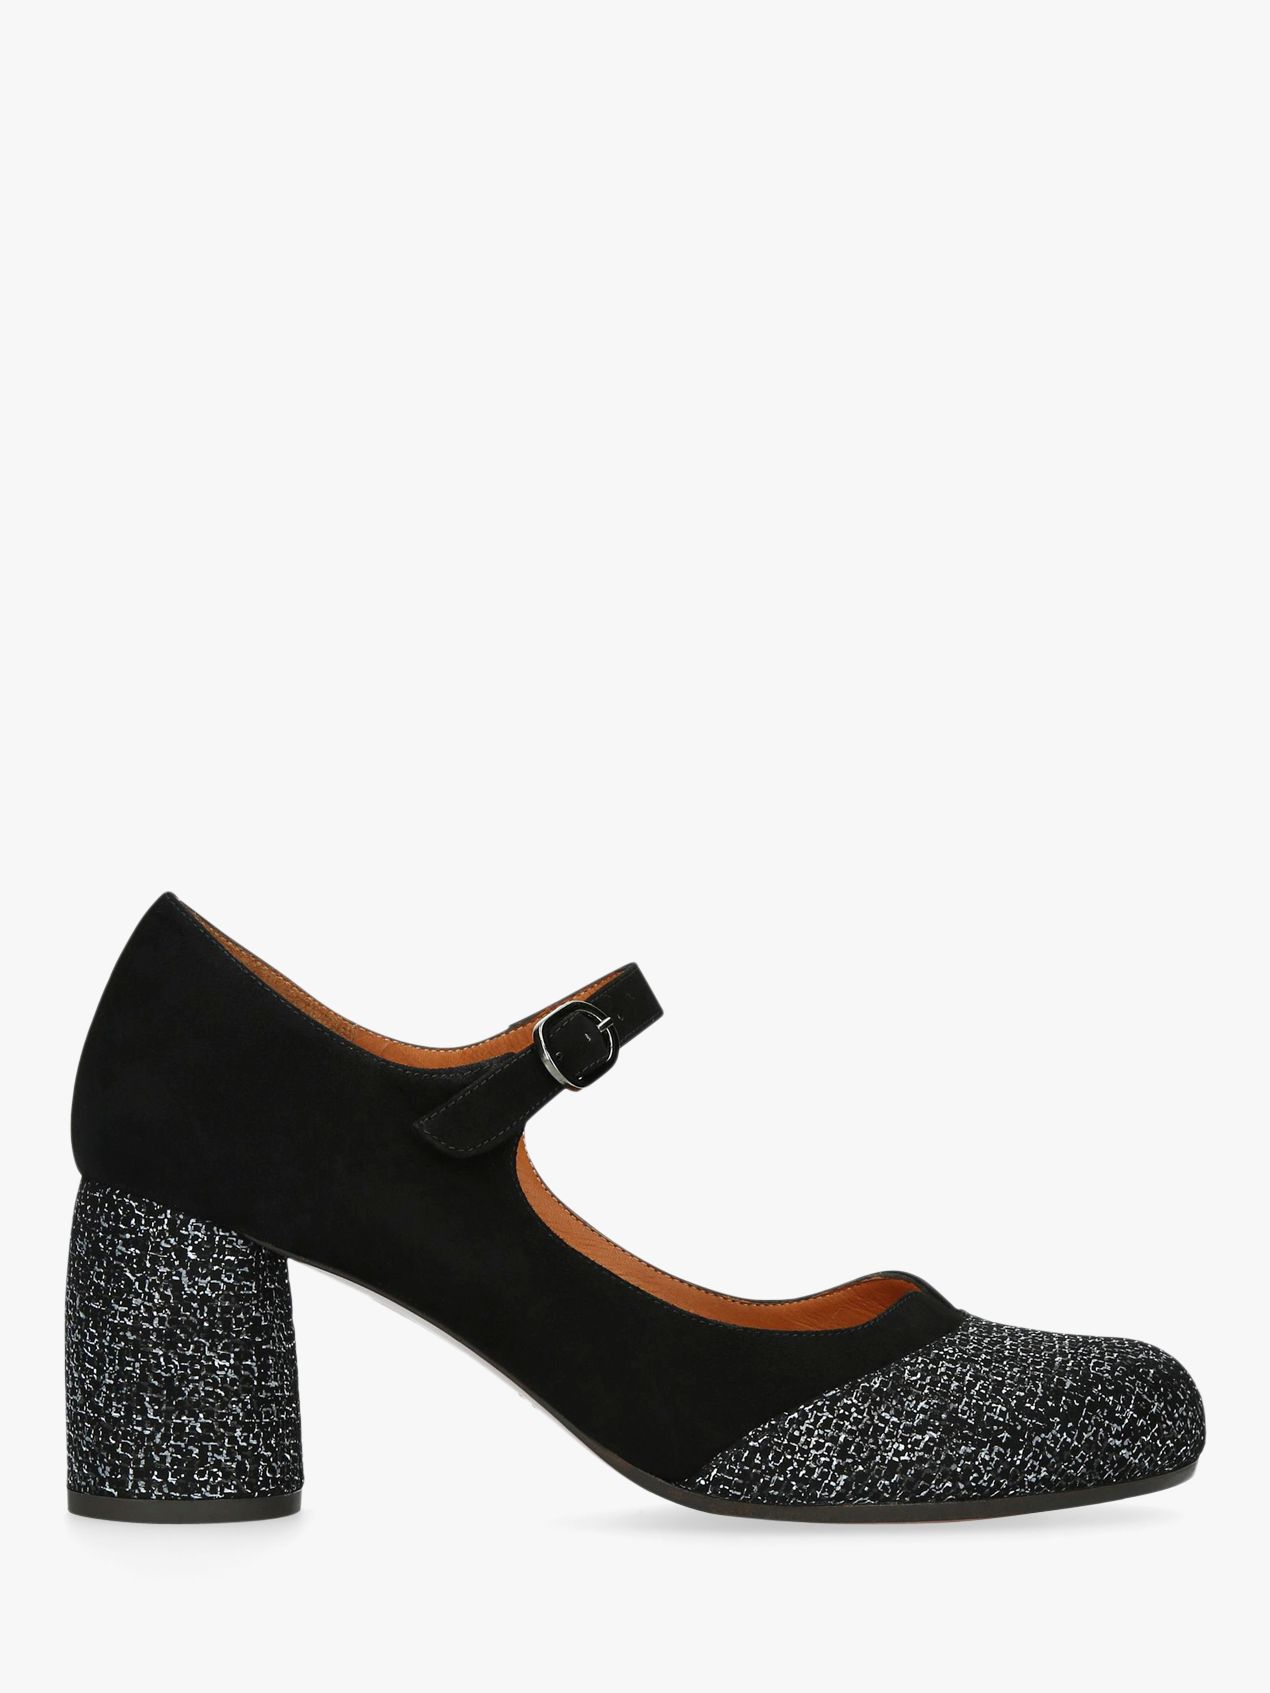 Chie Mihara Mona Block Heel Ankle Strap Court Shoes, Black Suede at ...